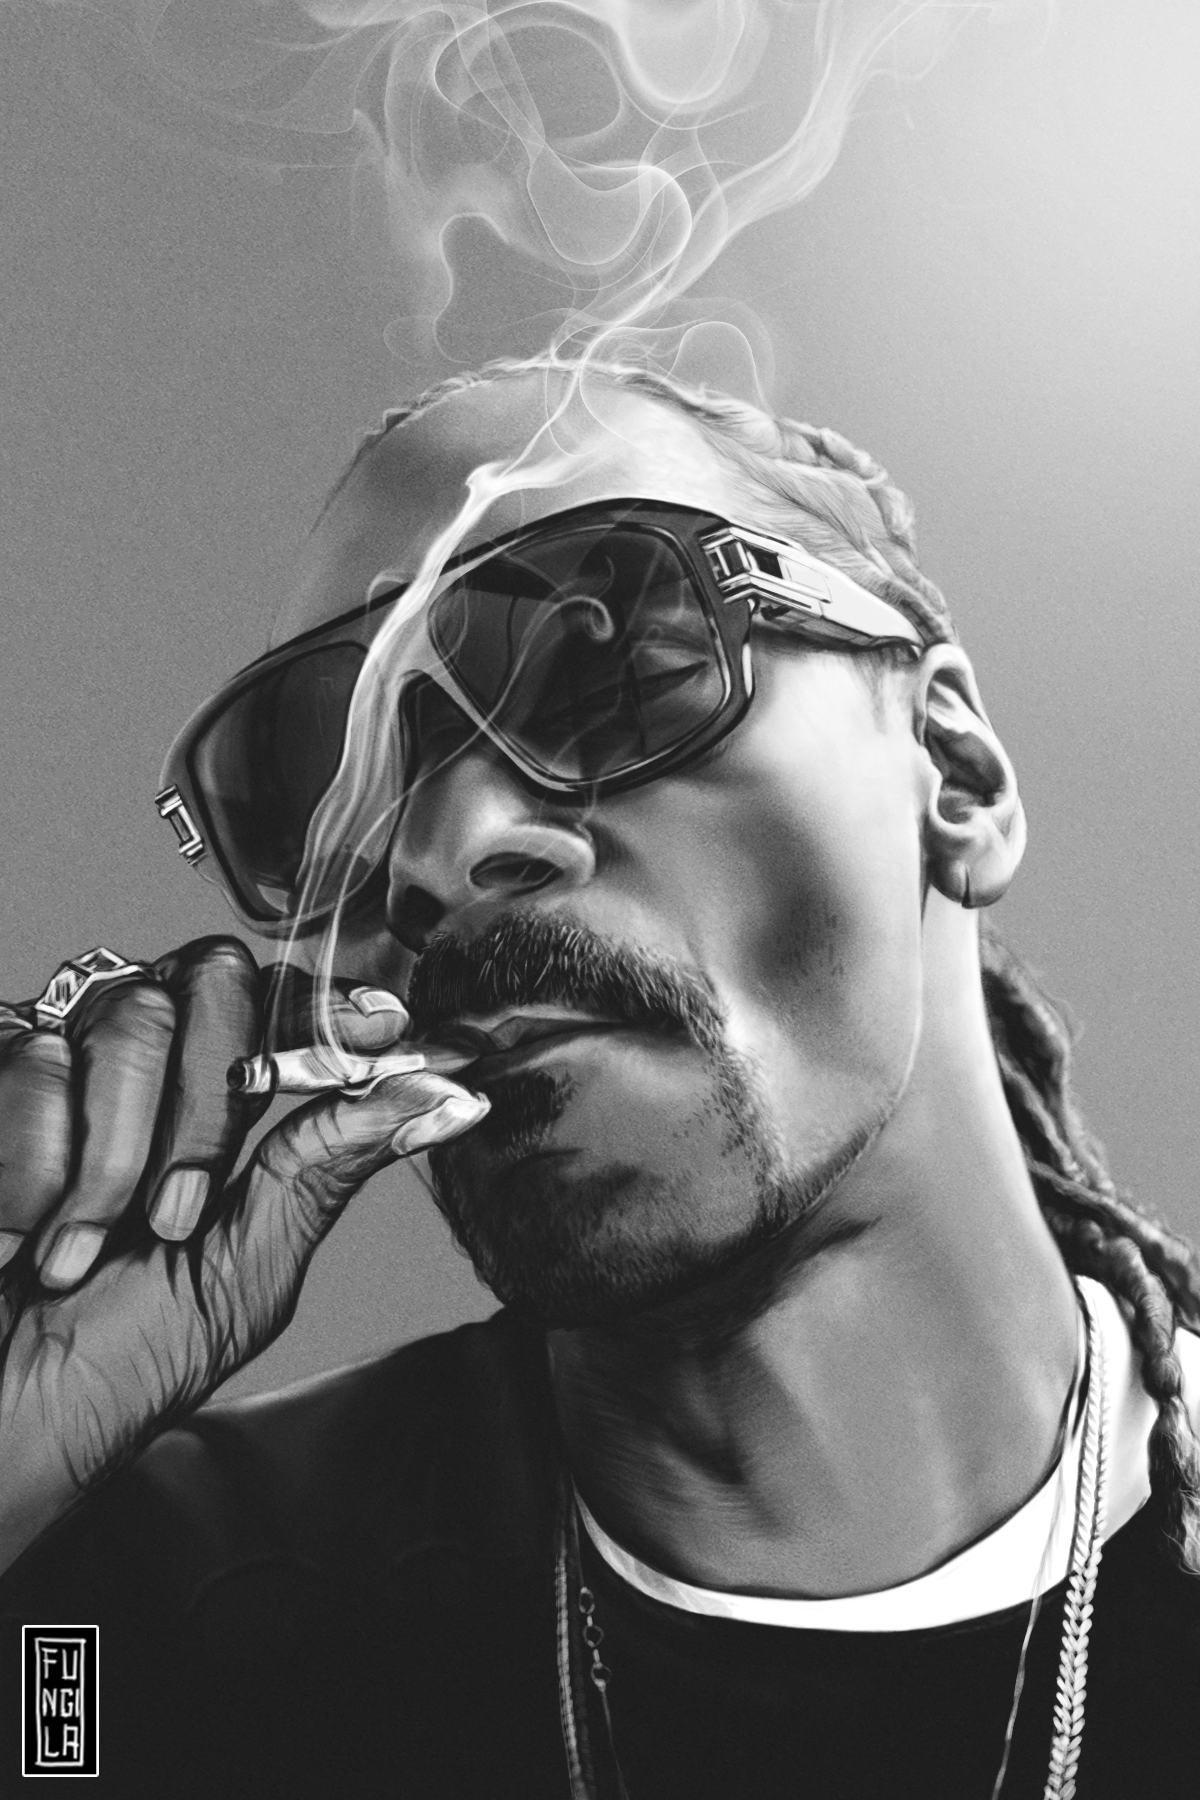 Snoop Dogg Dope Wallpaper Free Snoop Dogg Dope Background